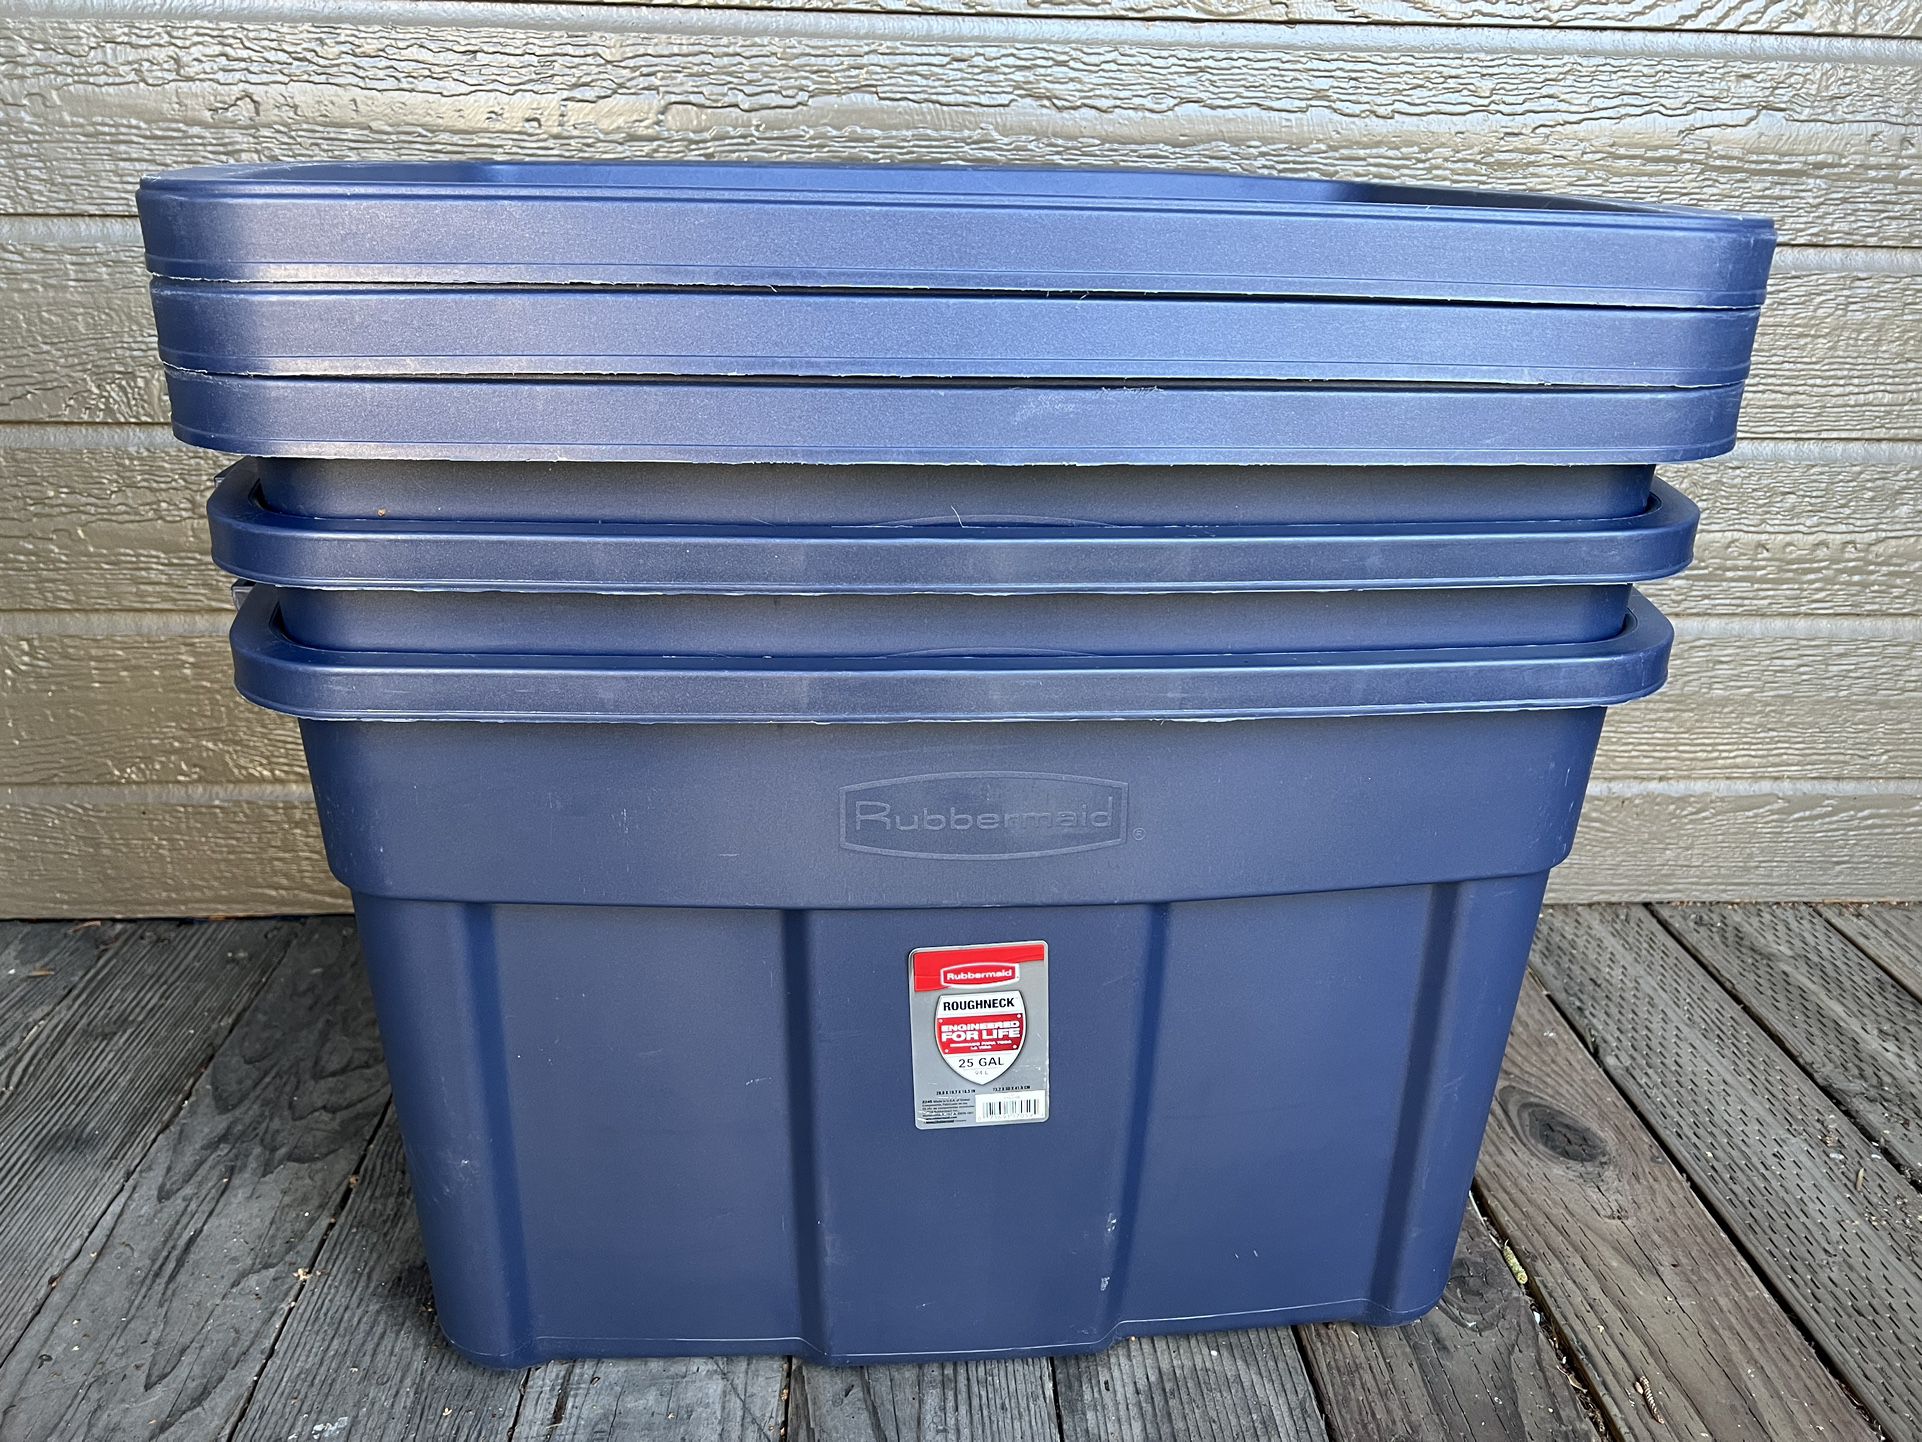 Rubbermaid Roughneck️ Storage Containers 25 Gal 3pack